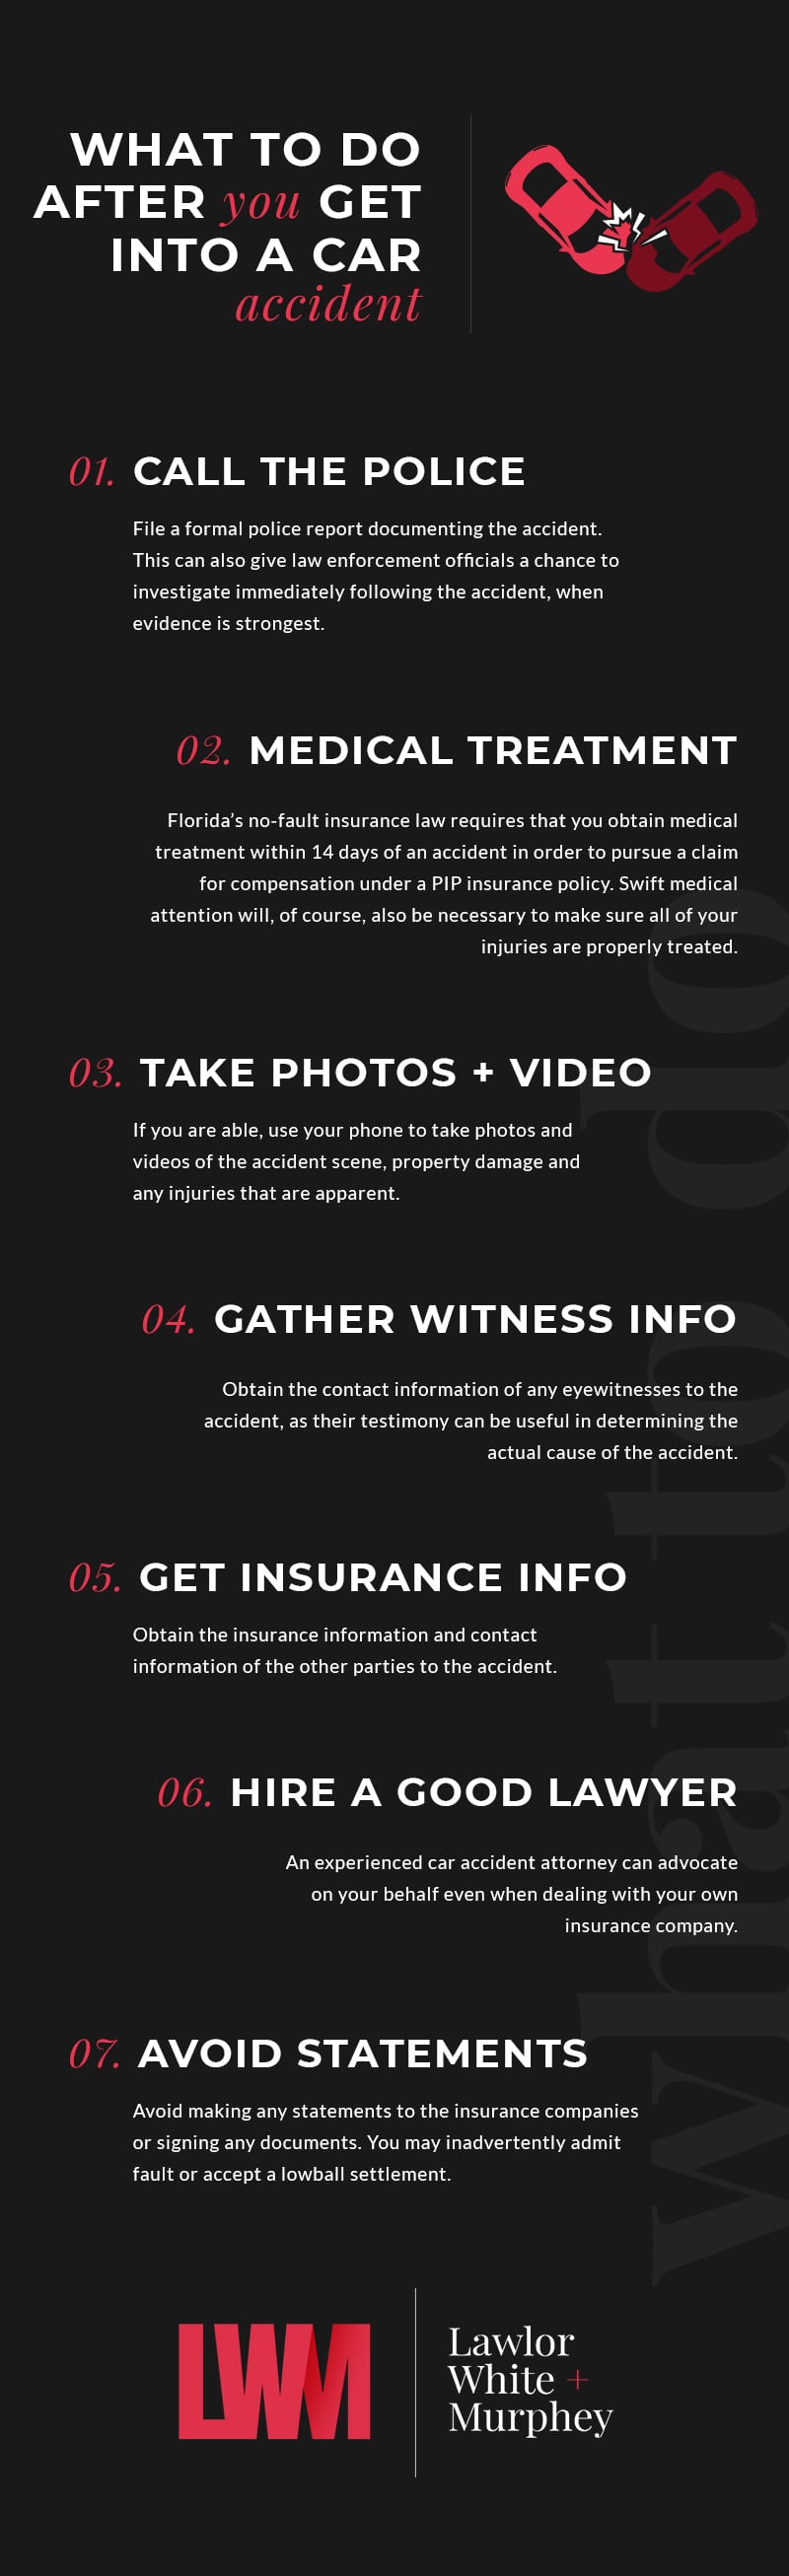 Fort Lauderdale Car Accident Lawyers - What To Do Infographic